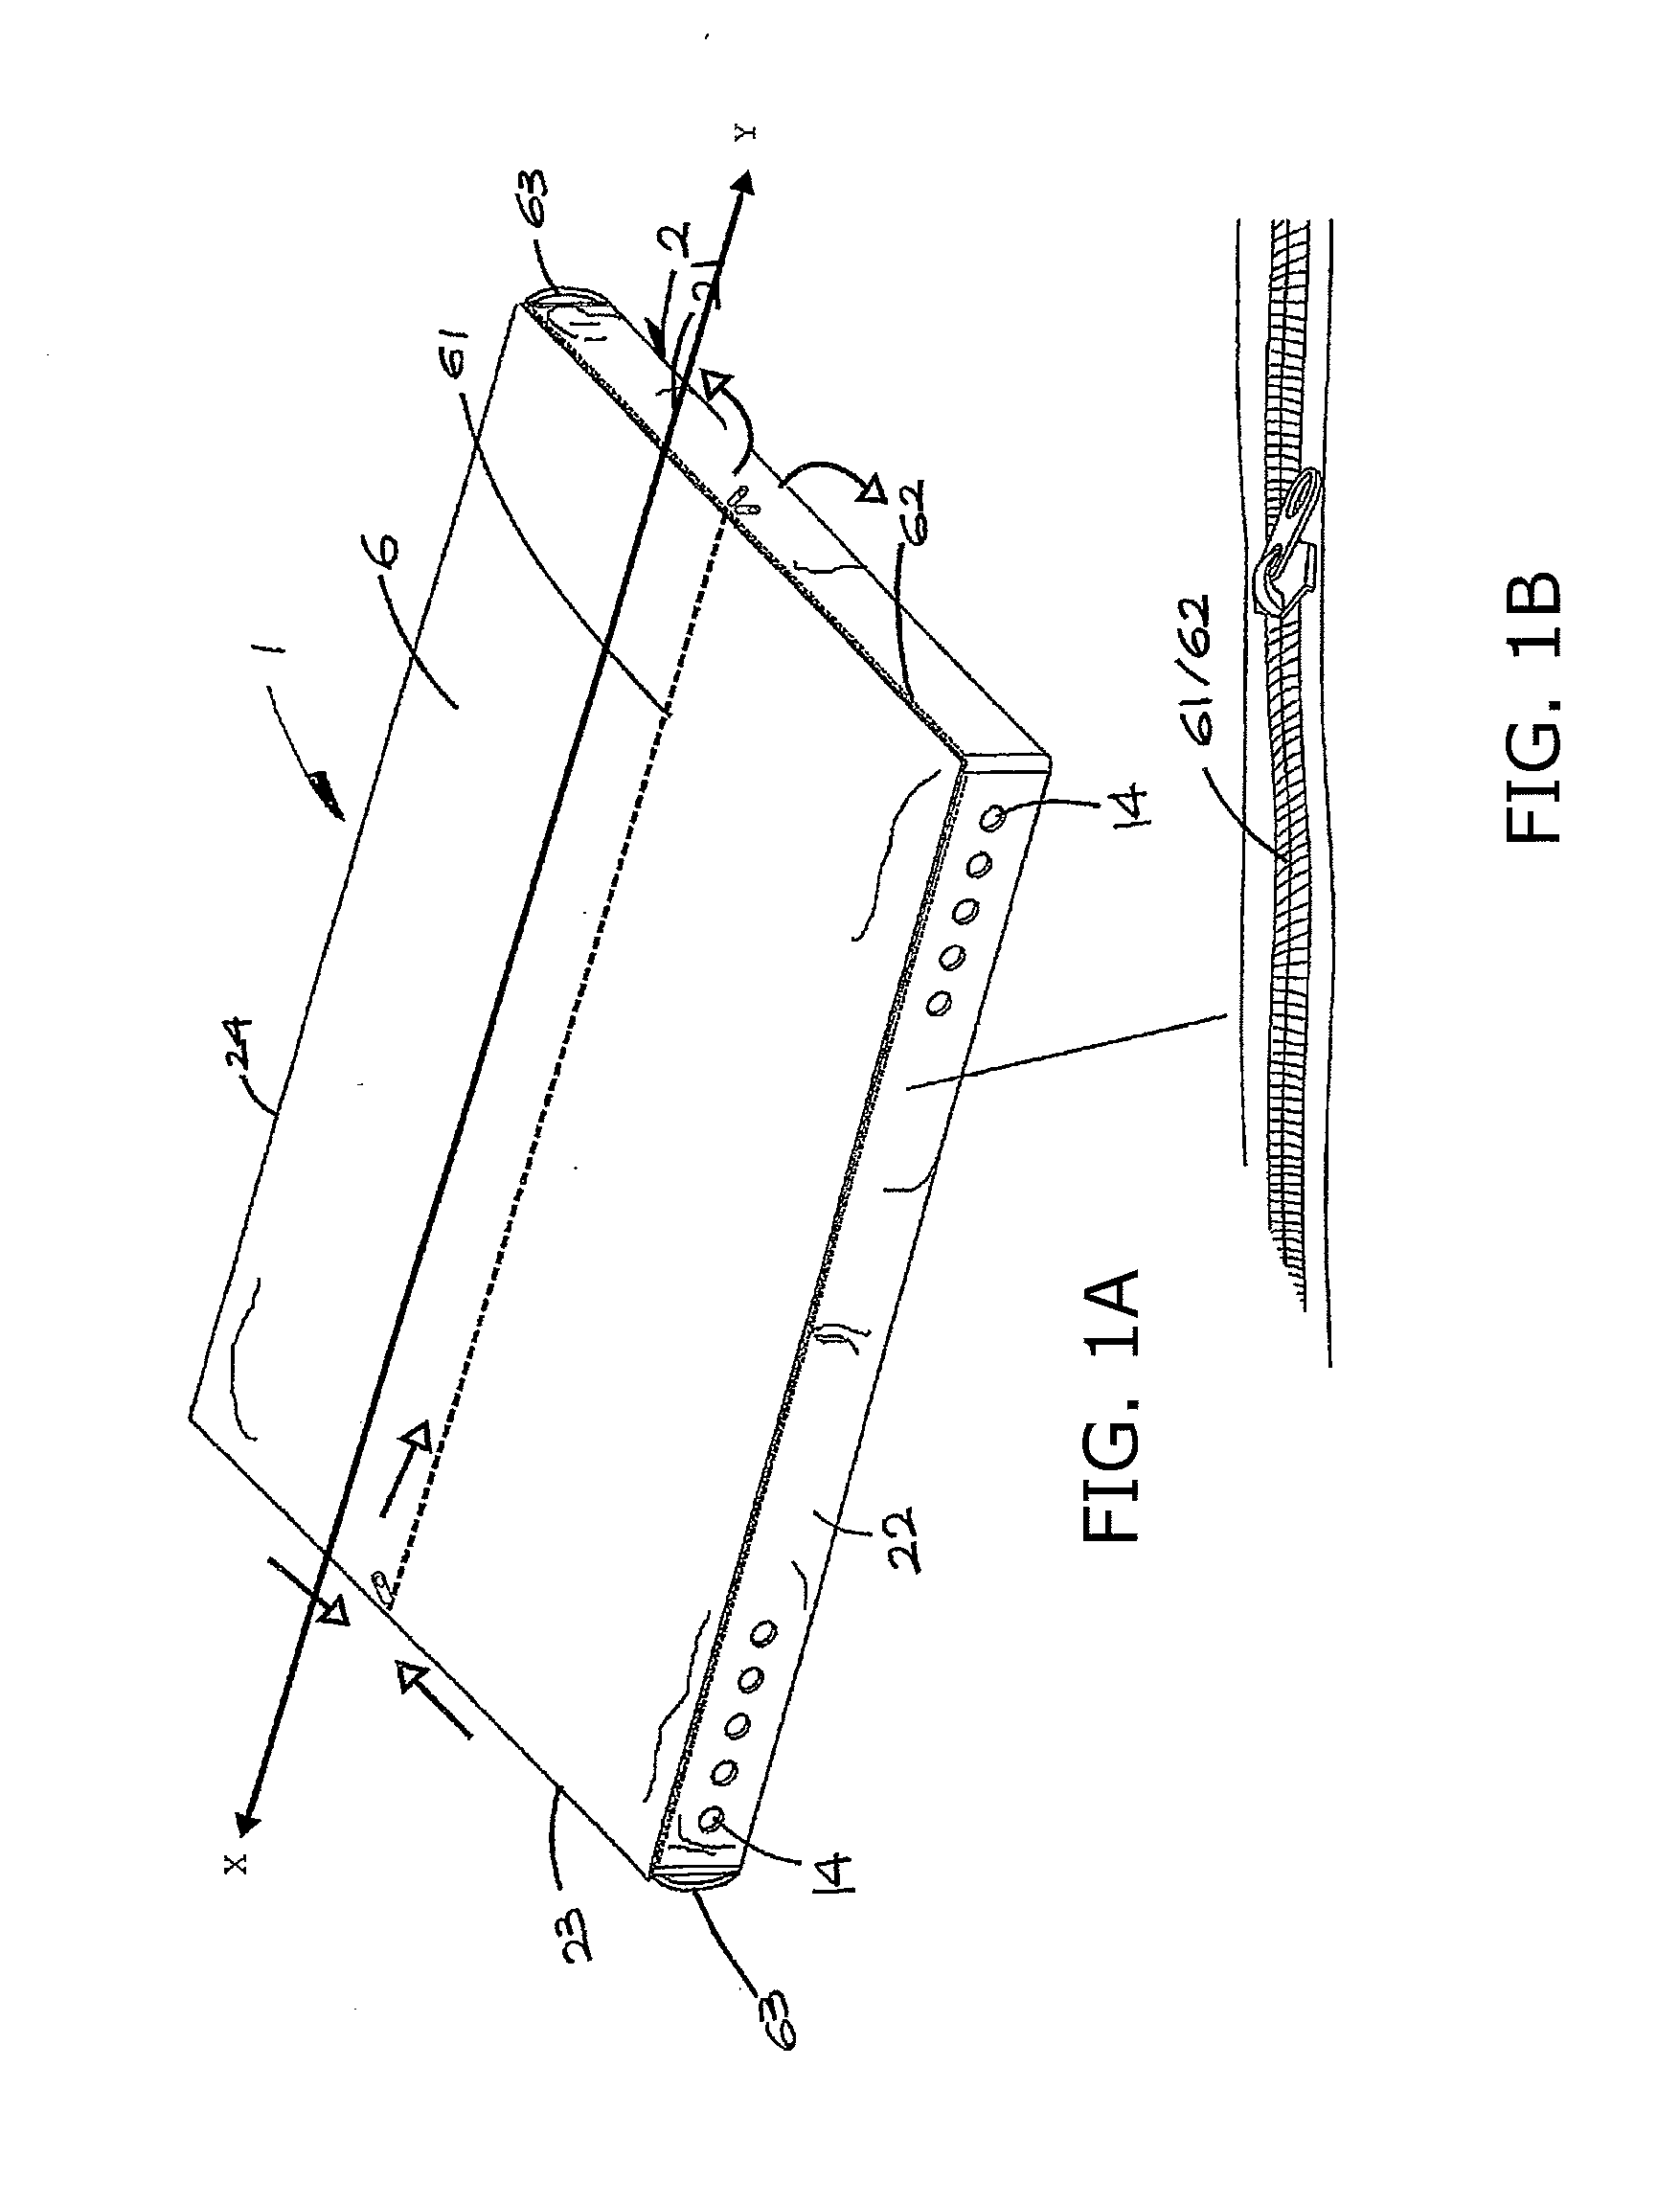 Mattress structure and a method using the characteristics of the mattress structure for understanding and deciding suitability of the mattress structure